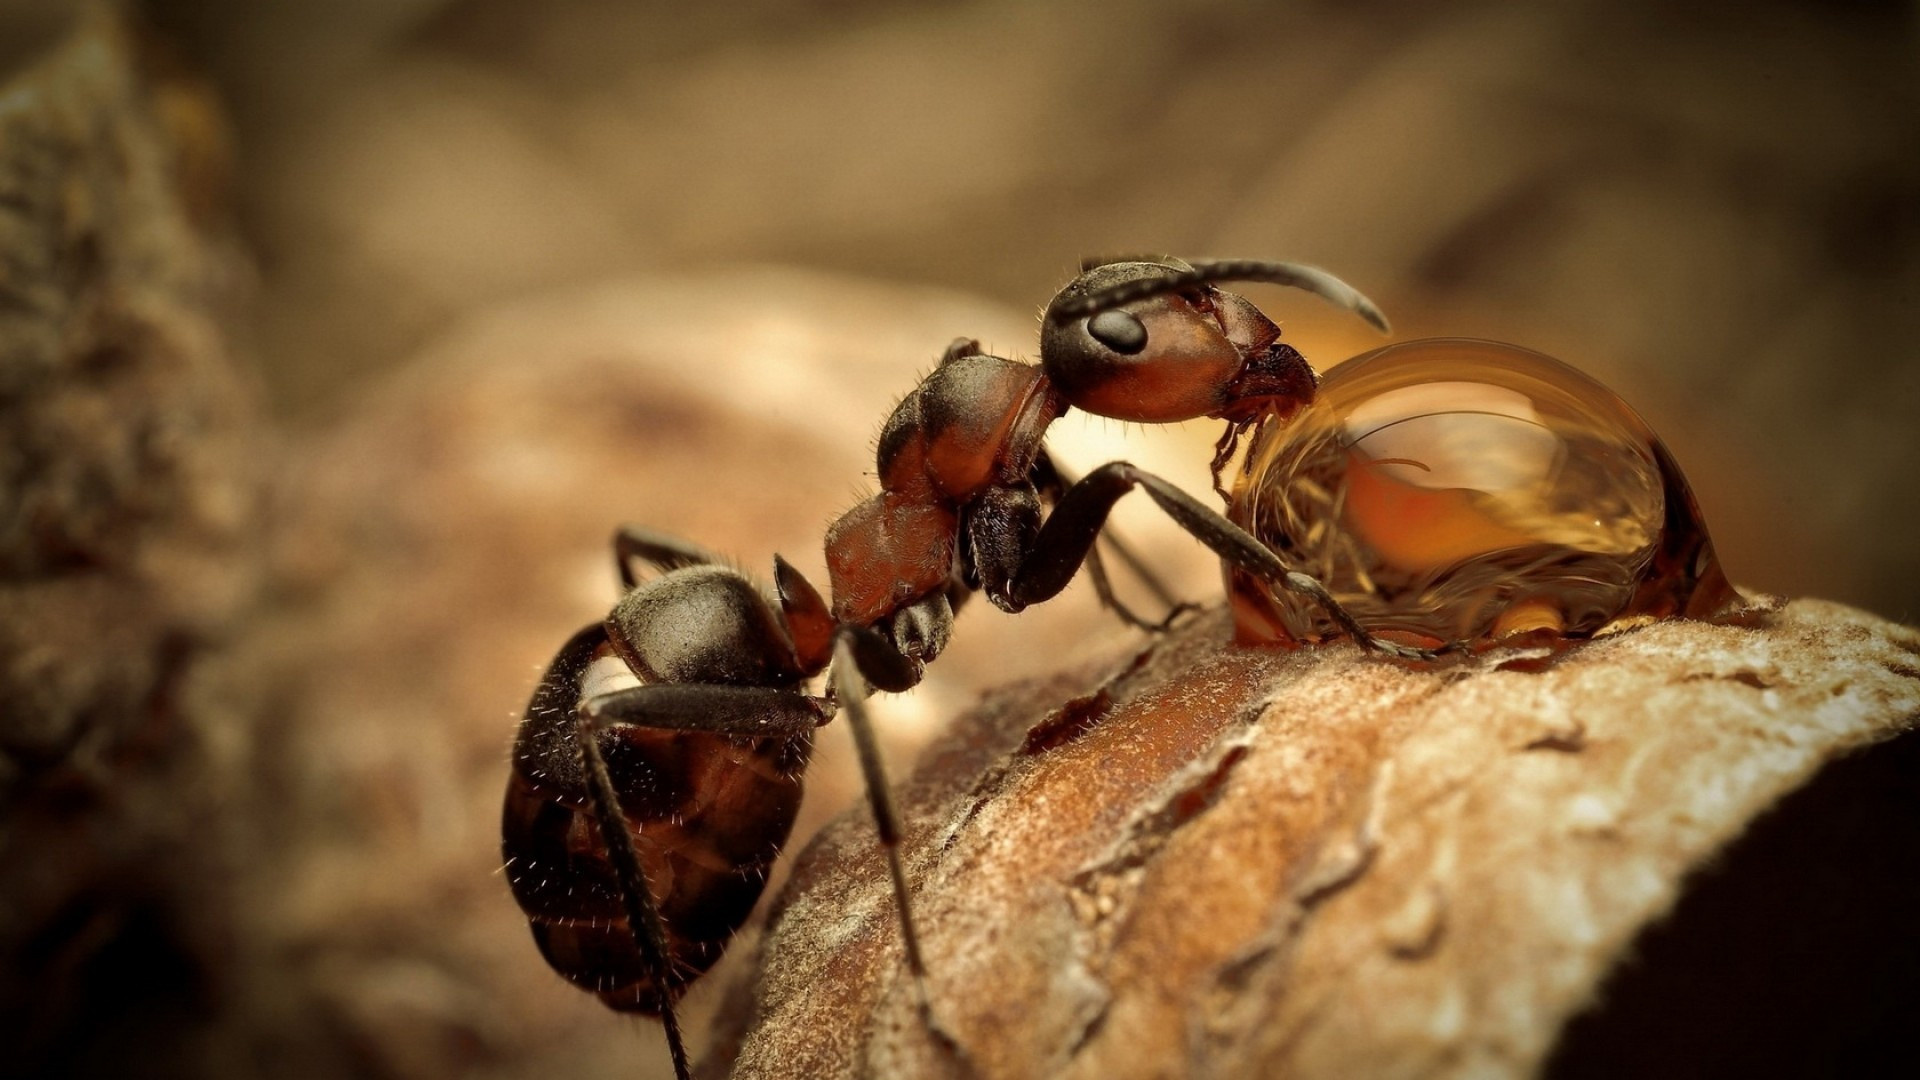 Ant macro, Blurred wallpapers, Widescreen backgrounds, Artistic perspective, 1920x1080 Full HD Desktop